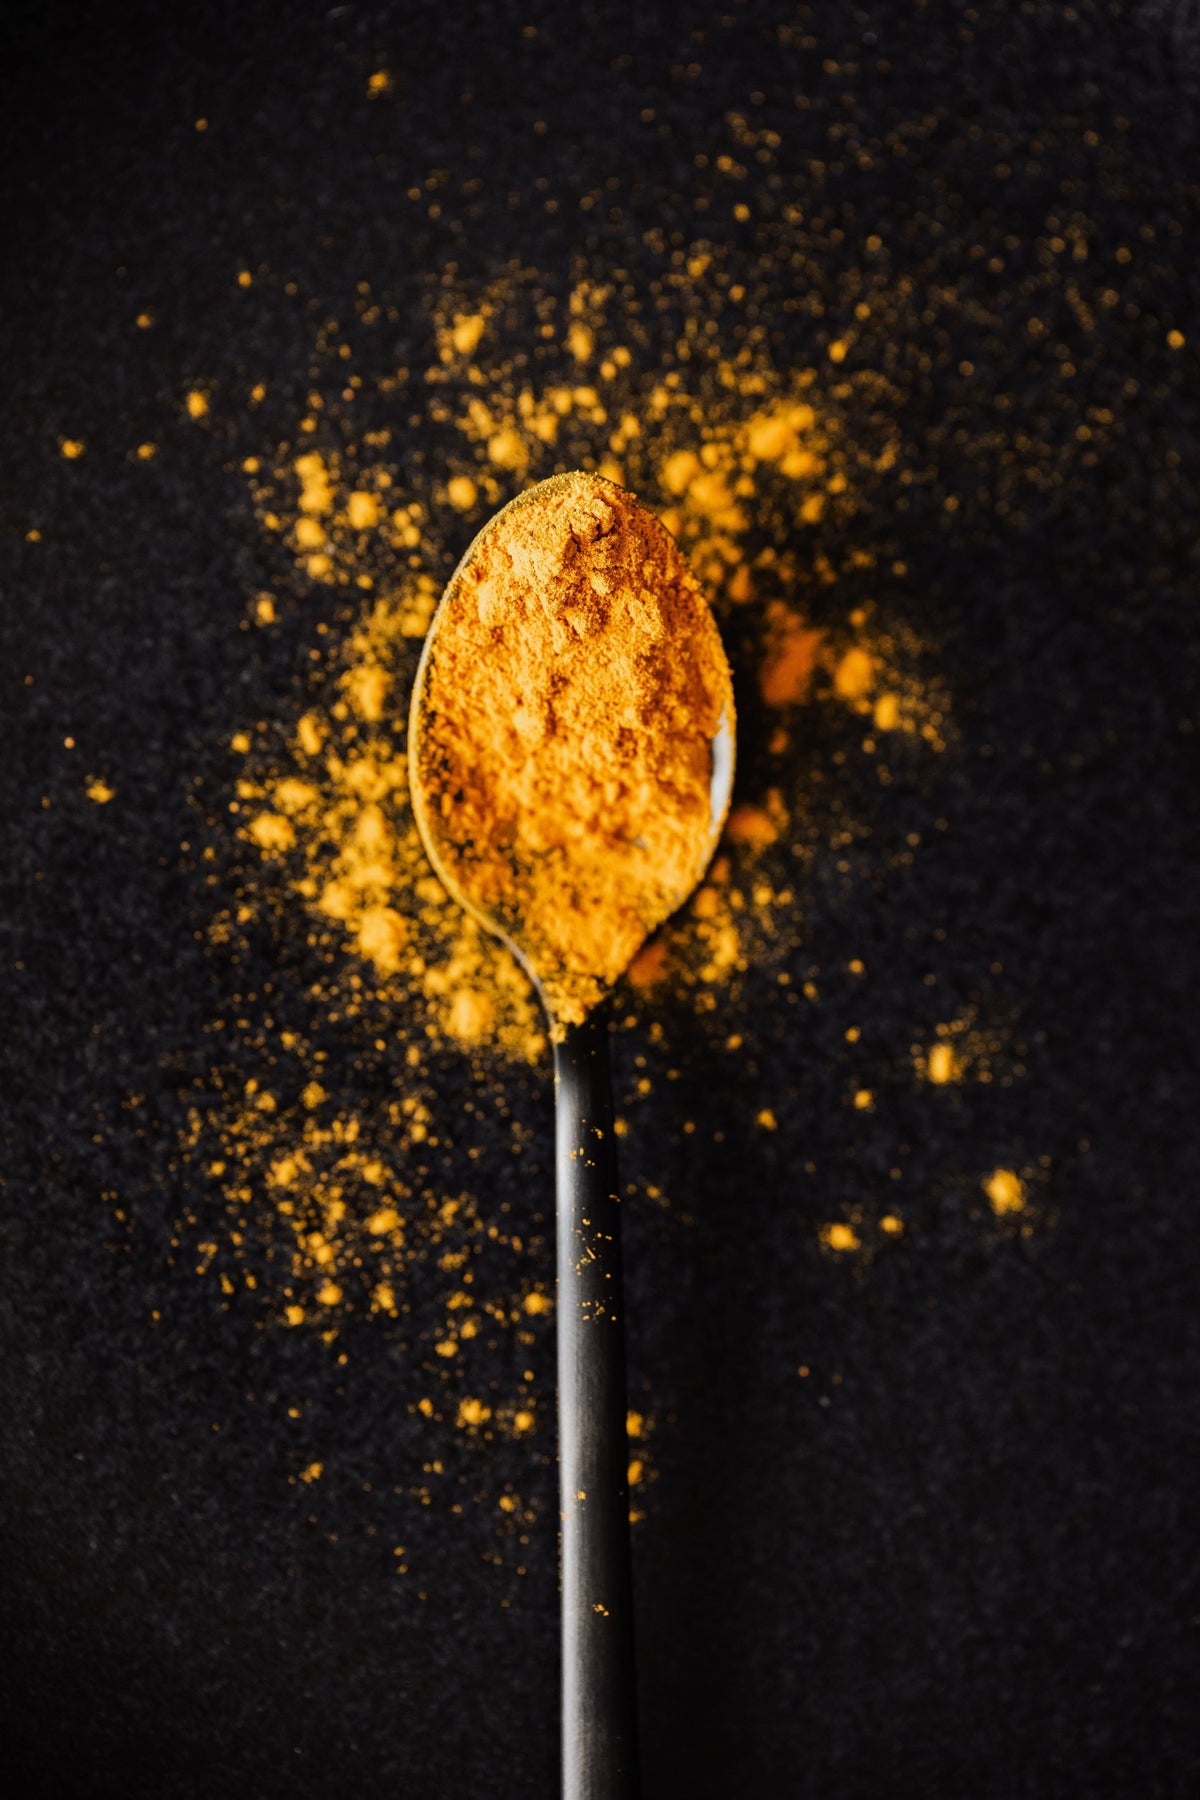 Does Turmeric Really Help With Plantar Fasciitis?